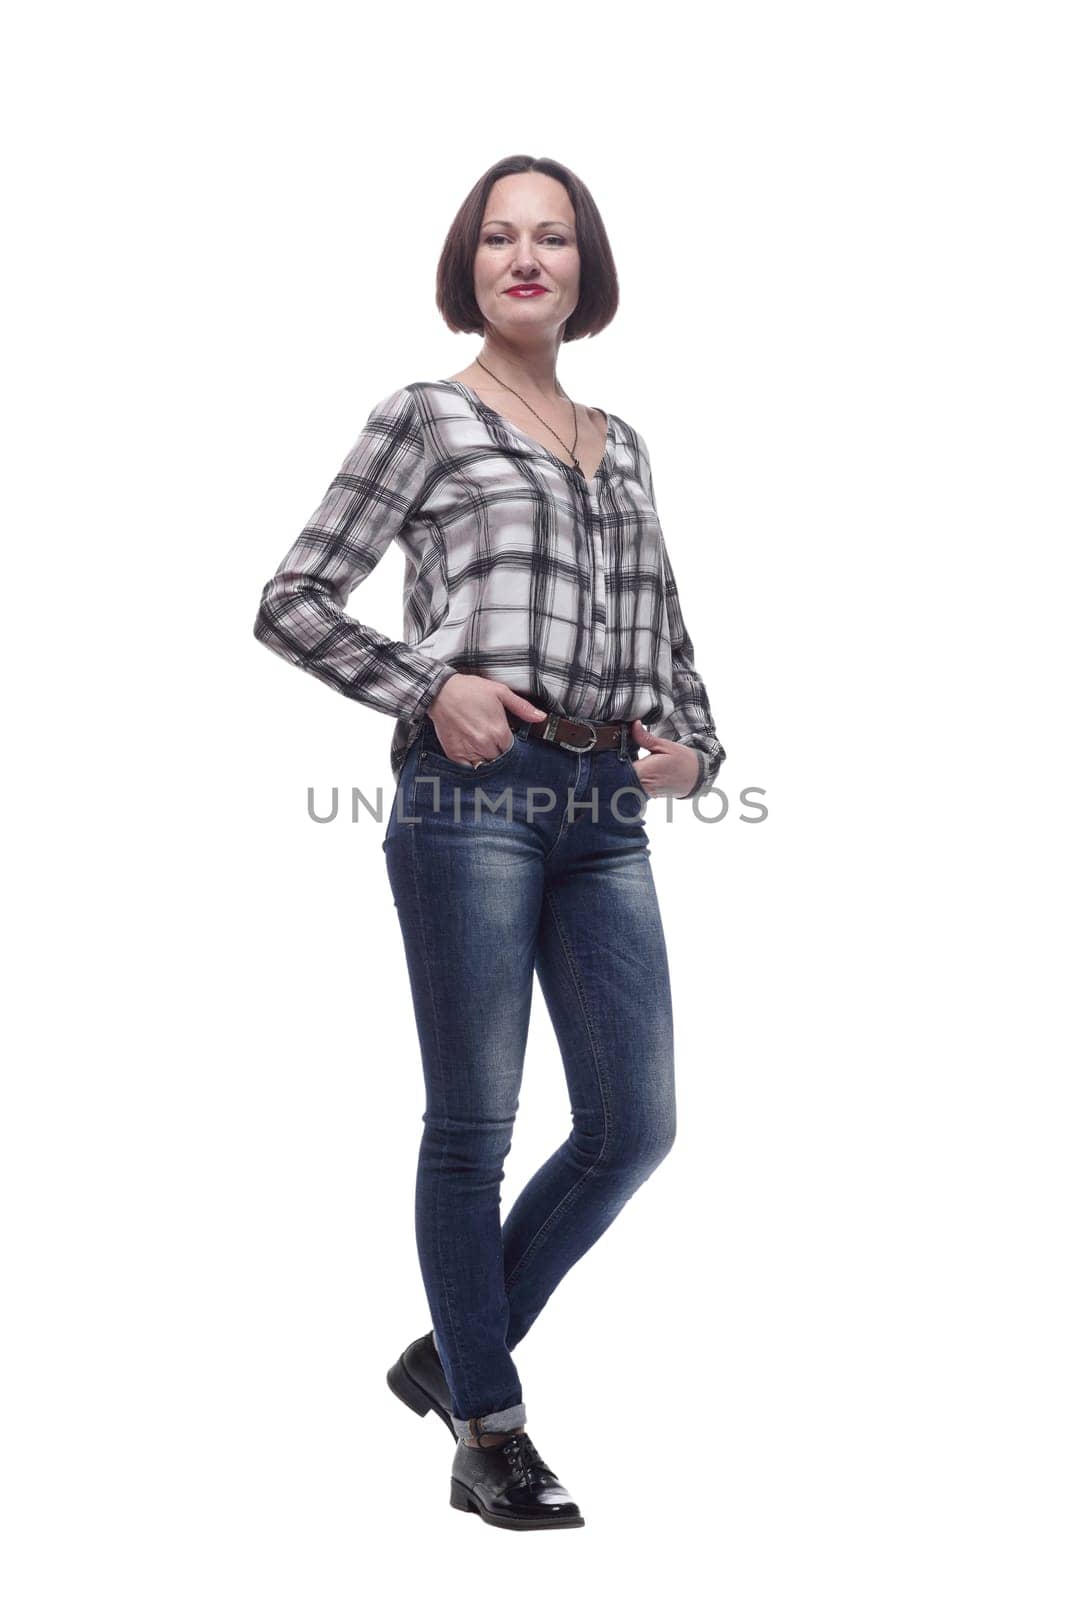 attractive woman in jeans and a checked shirt . by asdf